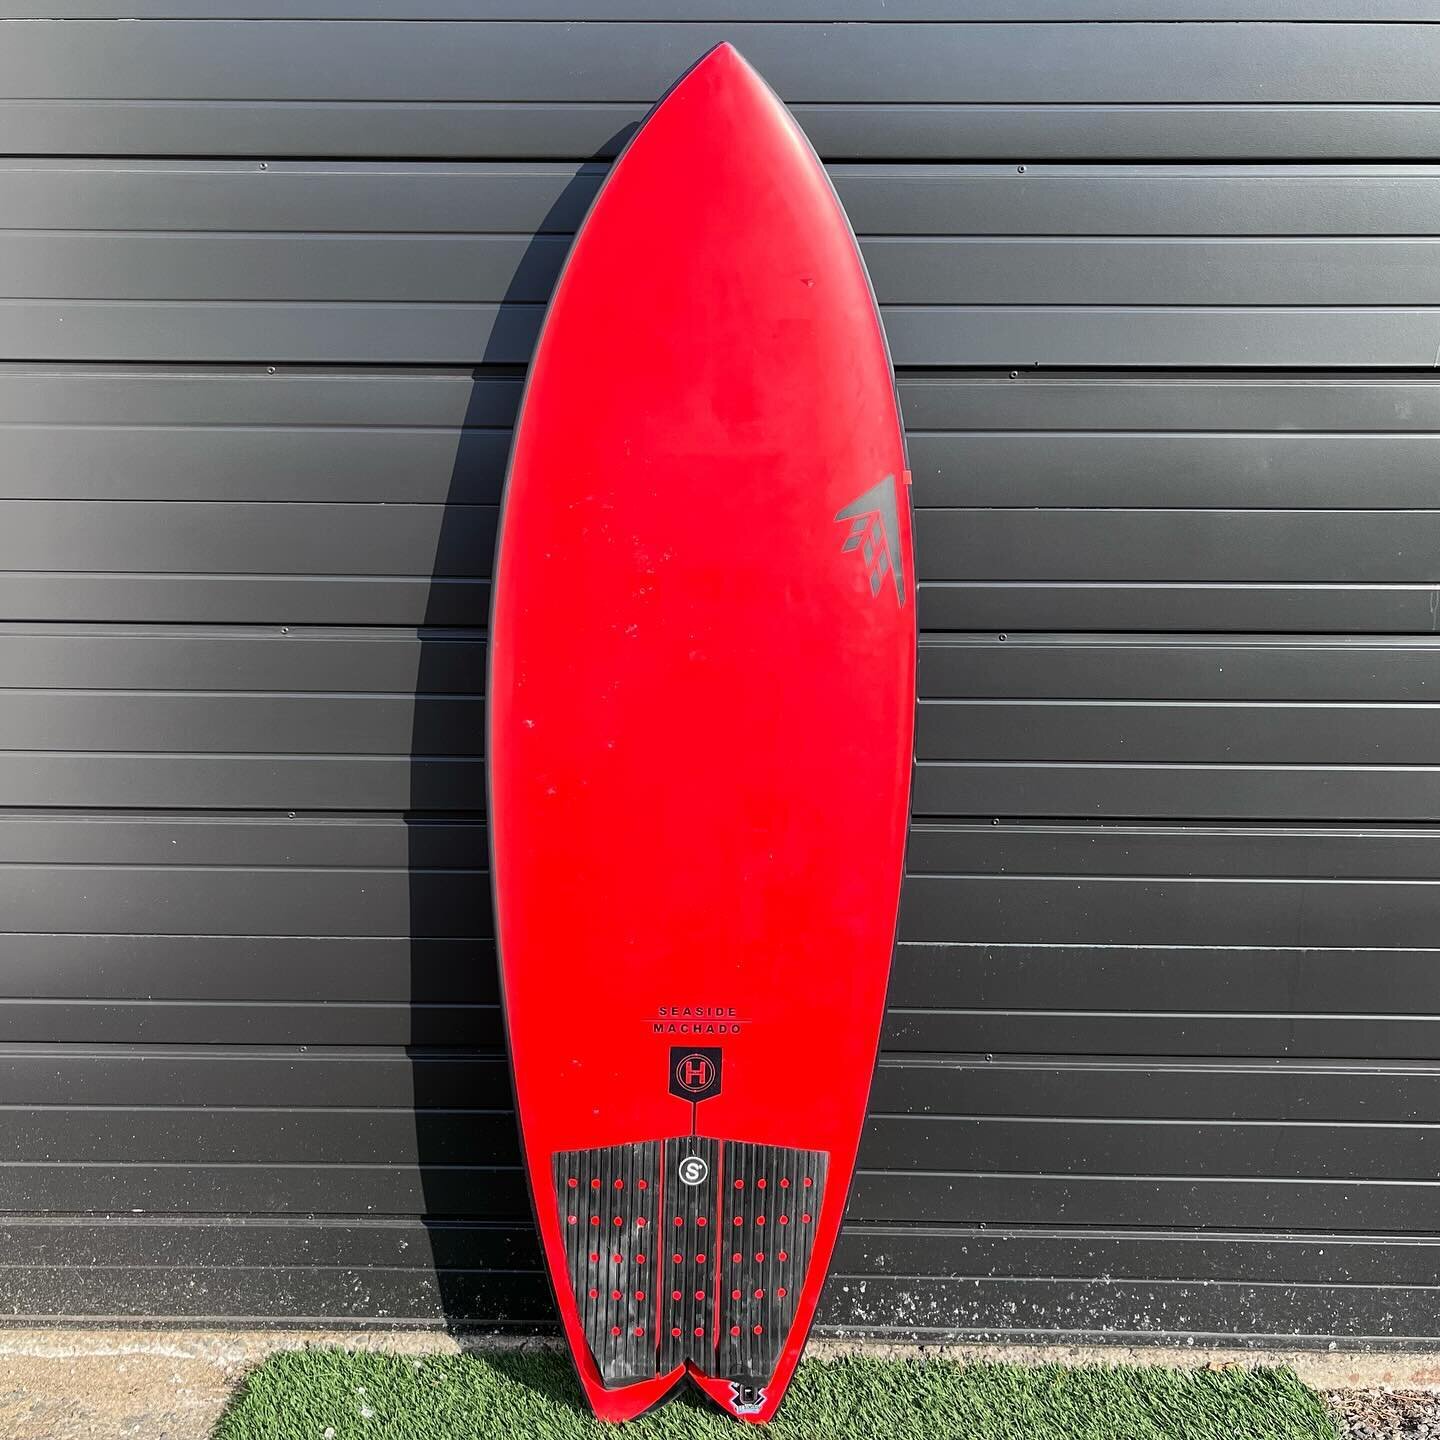 Used @firewiresurfboards Seaside
-
It&rsquo;s red and it&rsquo;s a rocket. Bright, loud, fast, and versatile. Just repaired by us.
6&rsquo;0 x 22 7/8 x 2 15/16 @ 44.8 Liters
-$650-